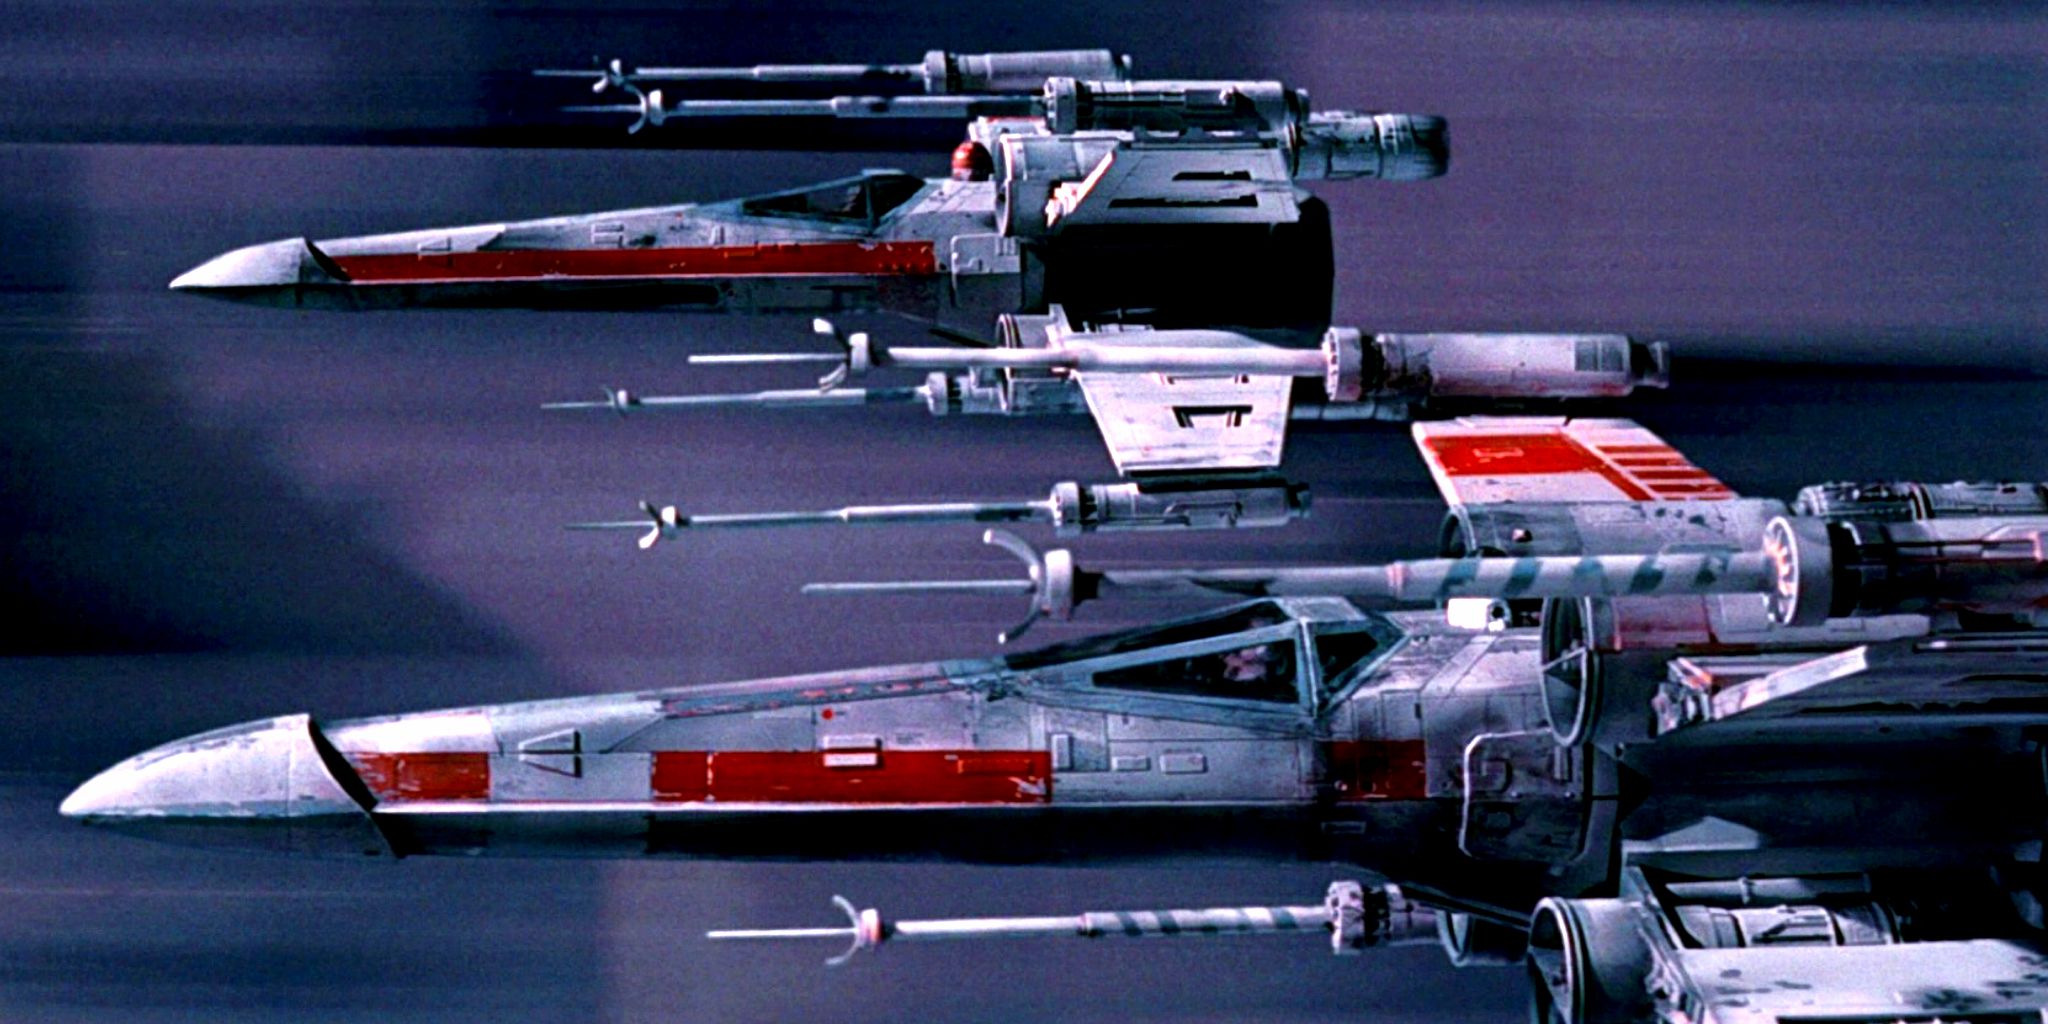 Star Wars’ Long-Lost “Missing X-Wing” Sells For ,135,000